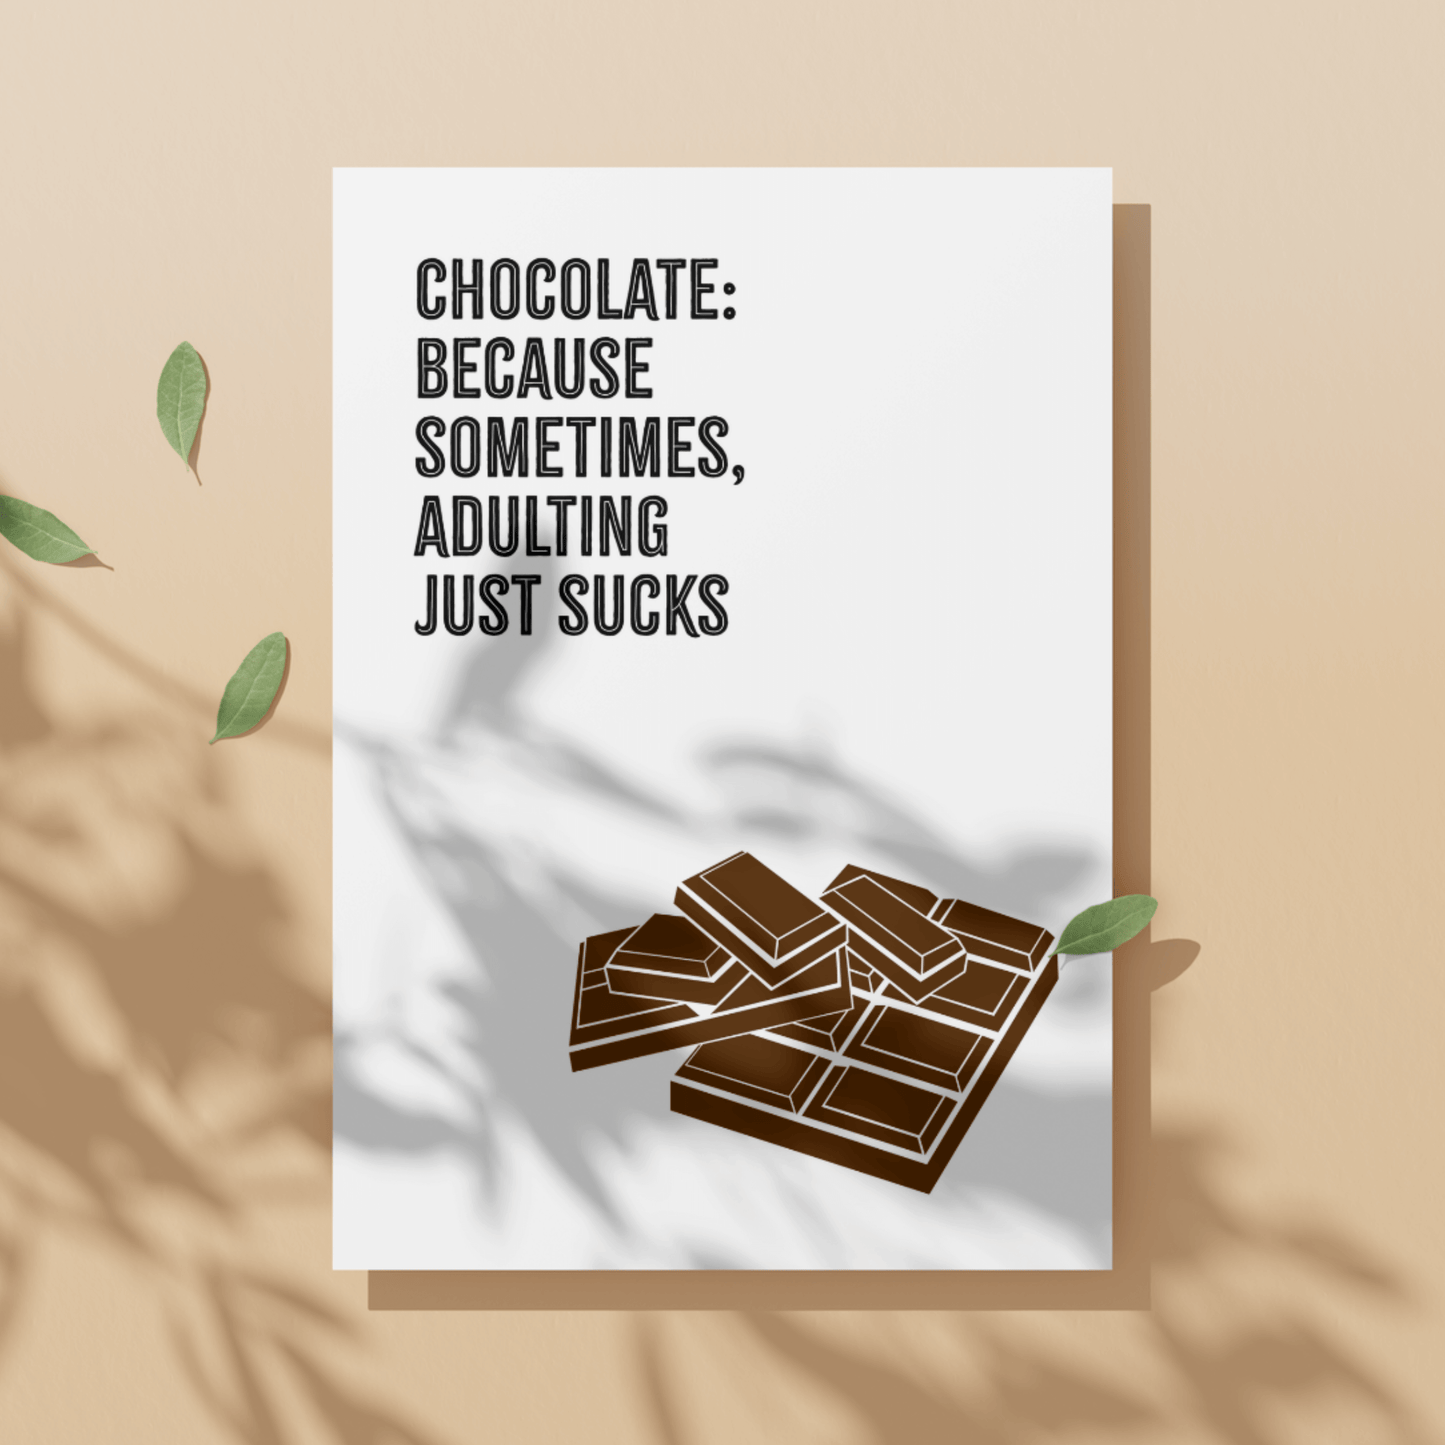 Little Kraken's Chocolate: Because Sometimes, Adulting Just Sucks, Sorry Card for £3.50 each